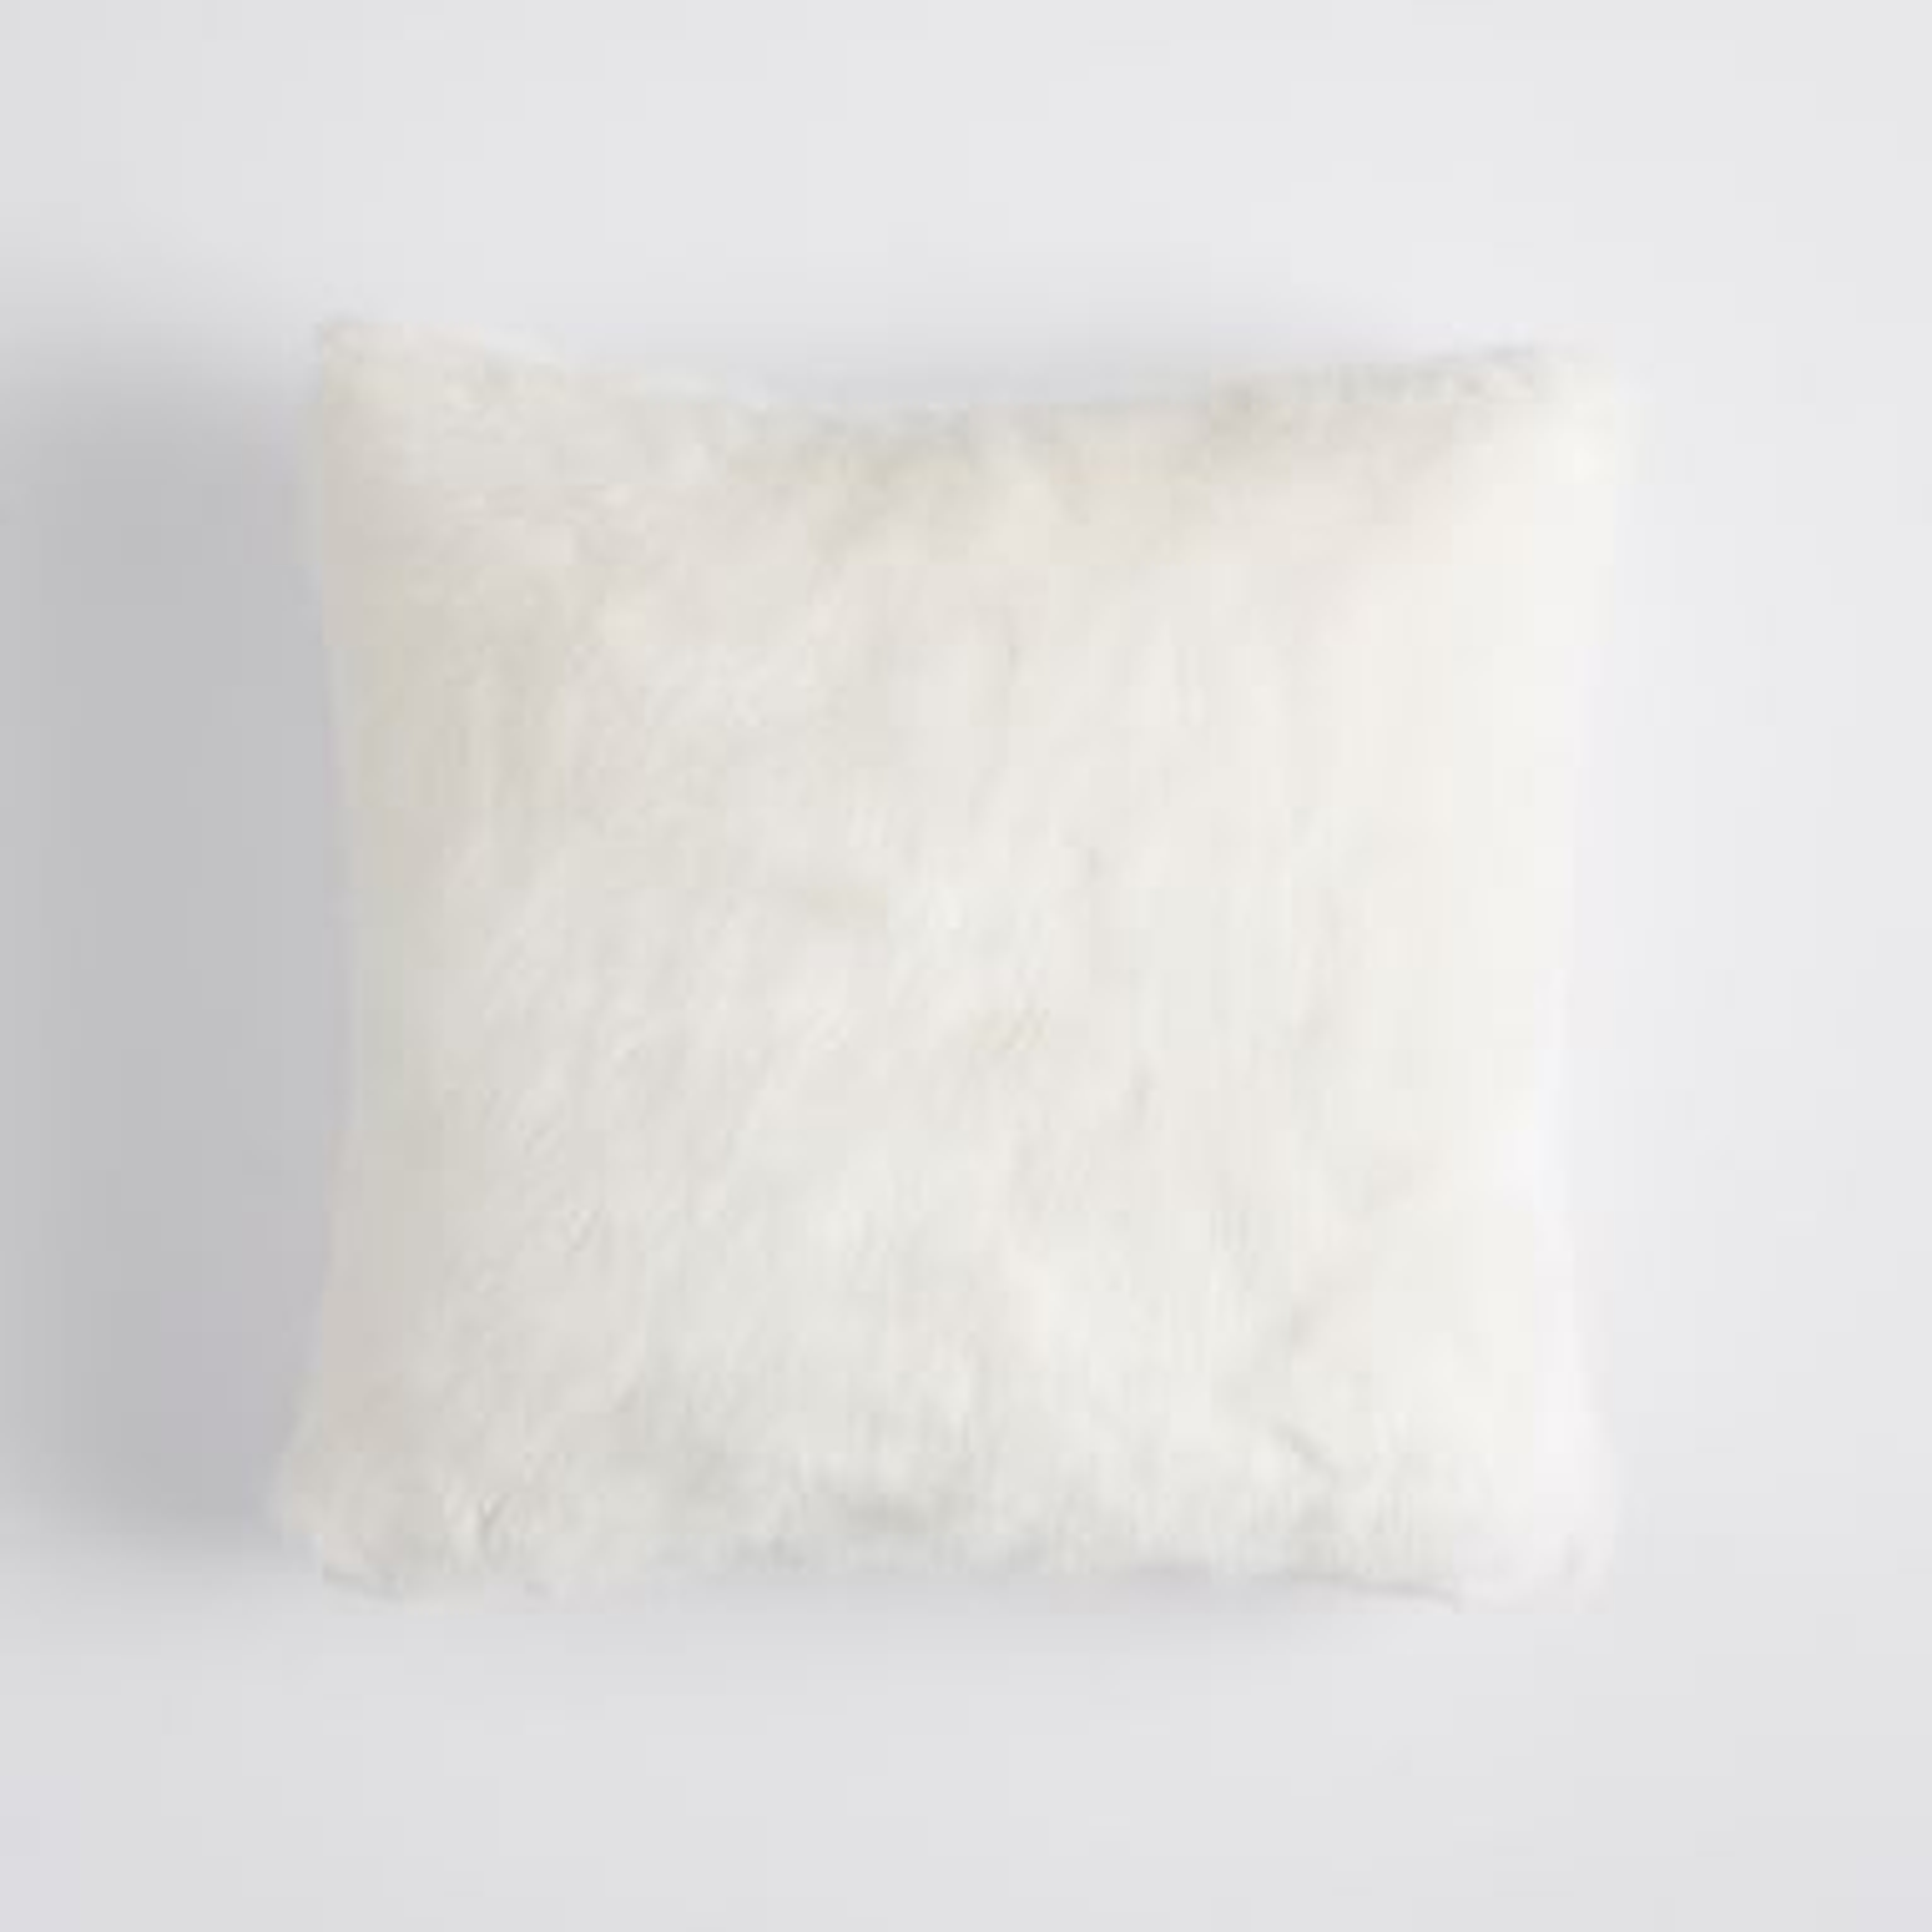 Ivory Ice Faux-Fur Pillow Cover, 18X18 - Pottery Barn Teen